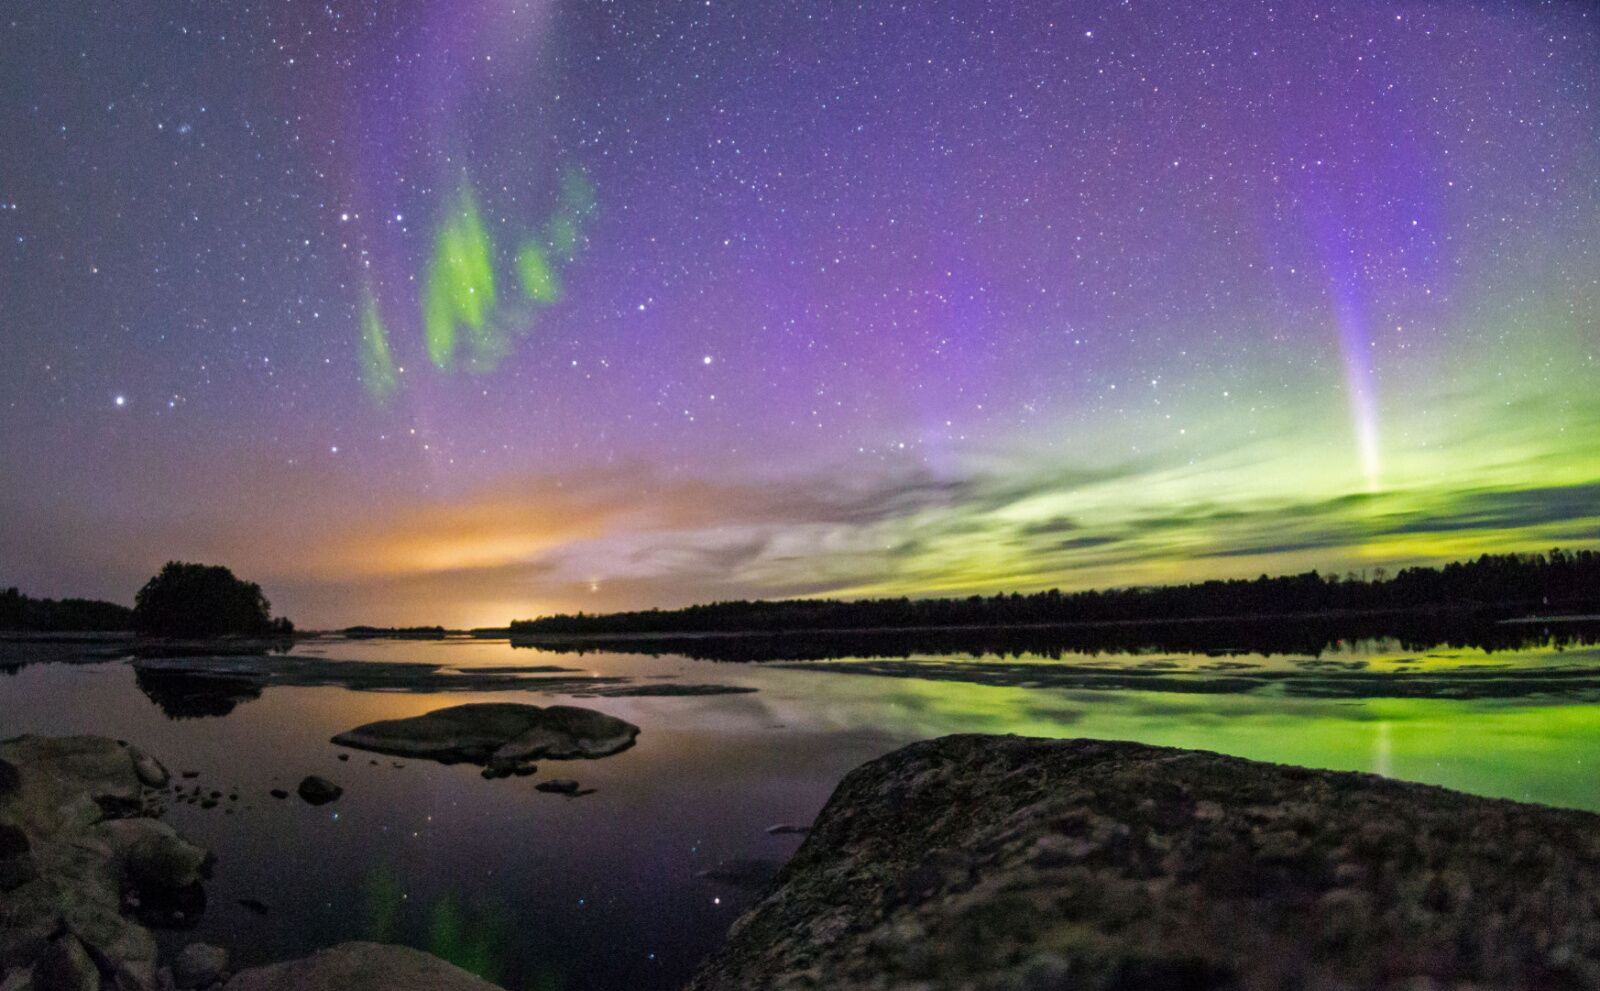 shown: the northern lights. seeing them is one of the best things to do in the midwest in winter